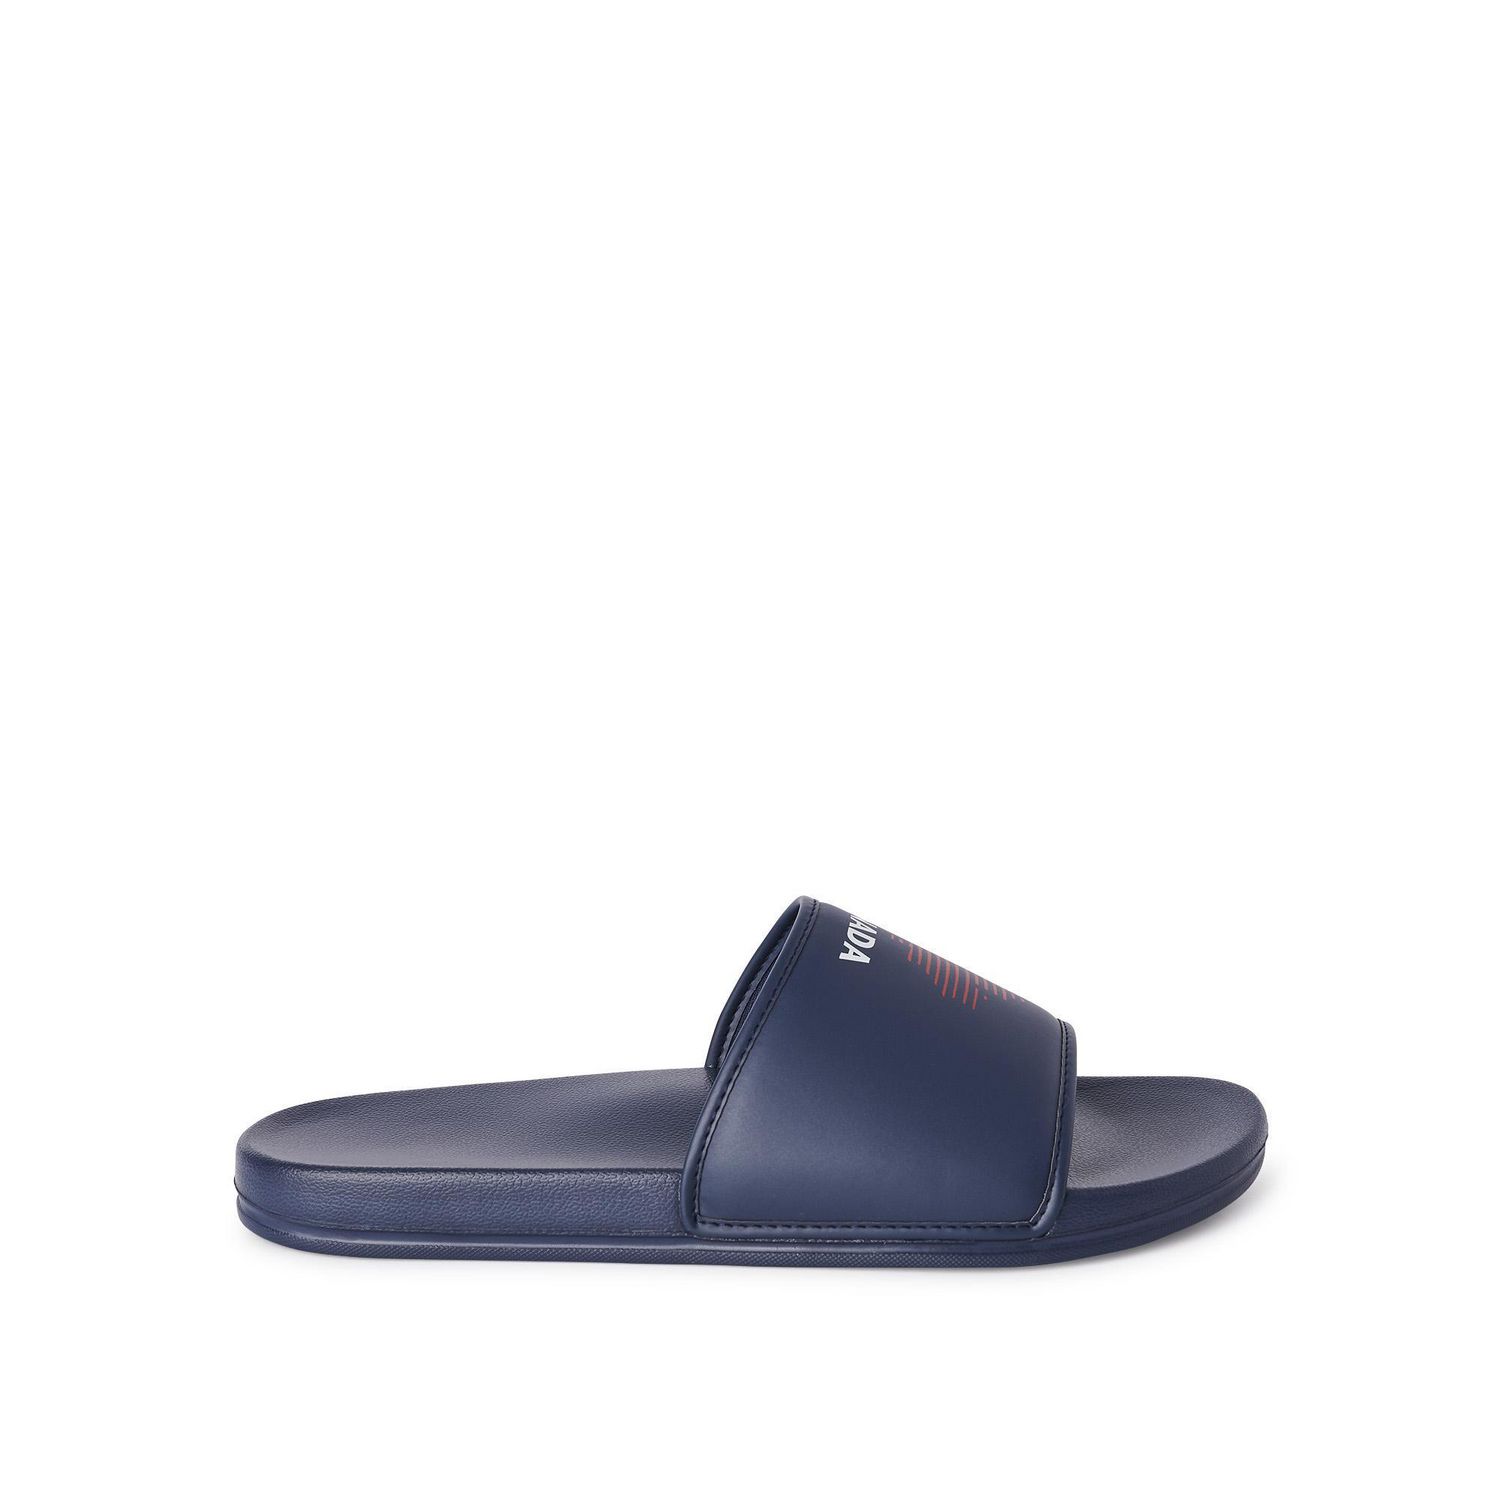 leather slides canada